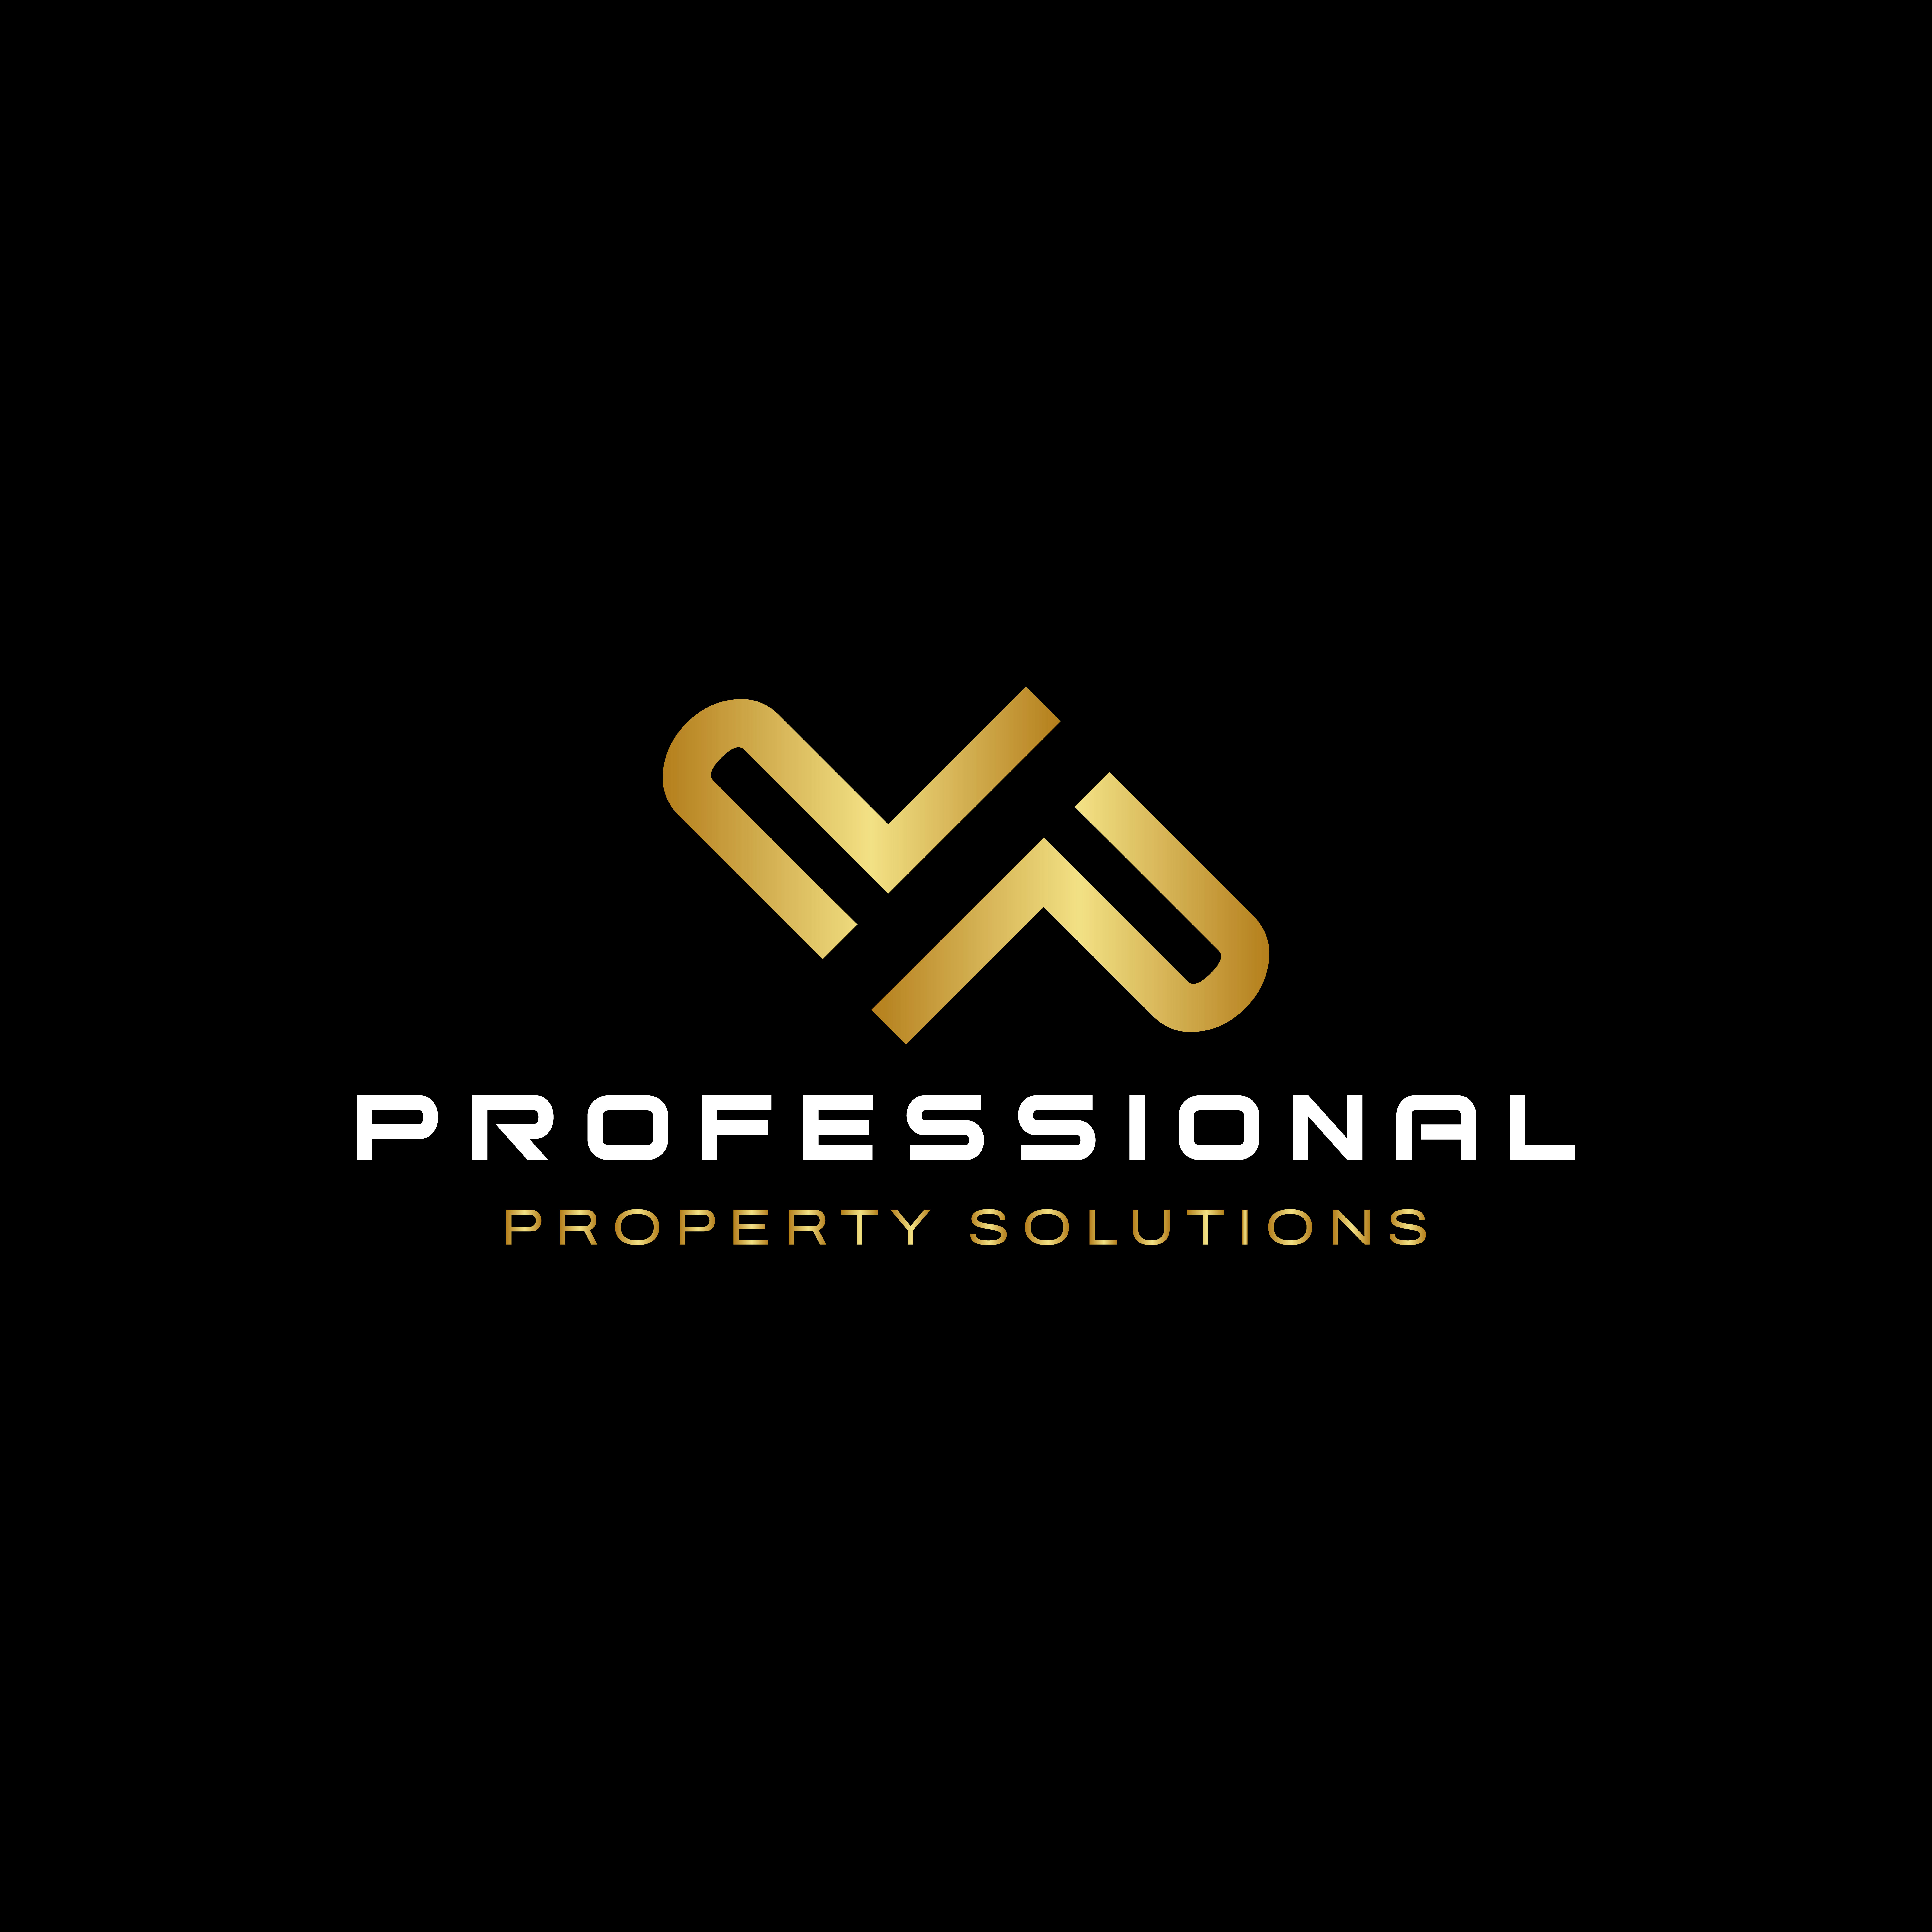 Professional Property Solutions Logo